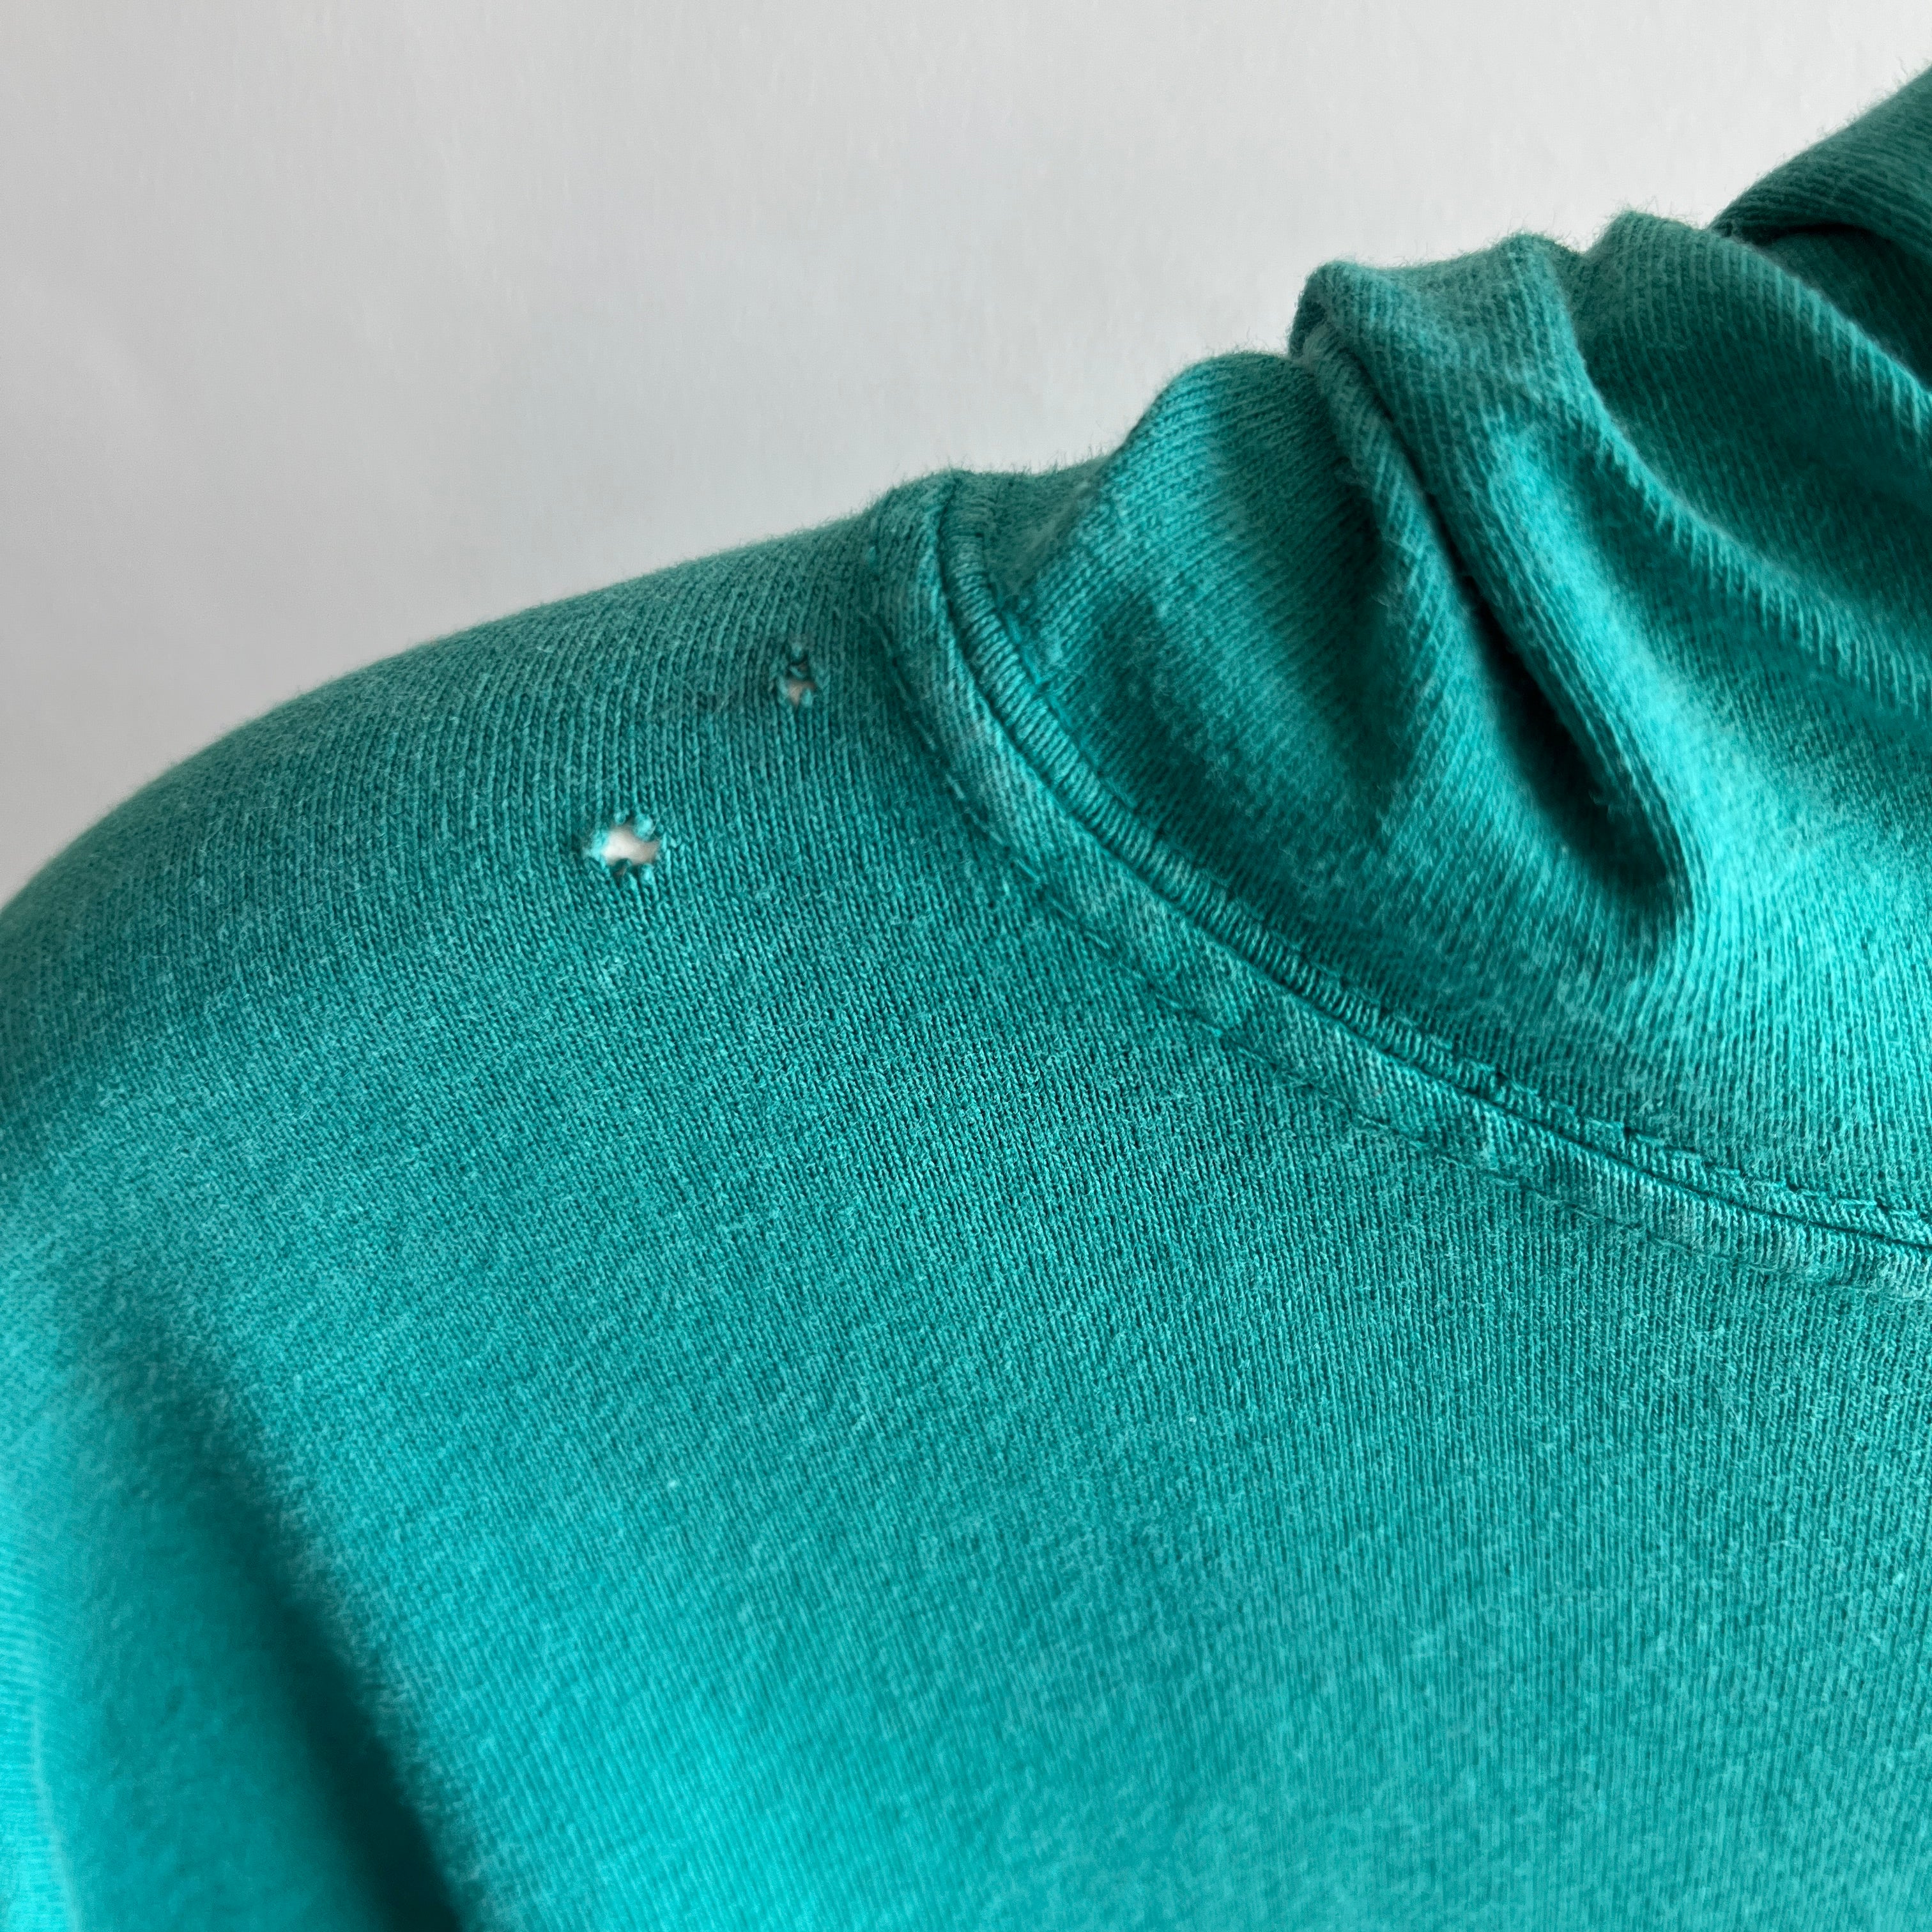 1980/90s USA made Gap Long Sleeve Hoodie Shirt with Small Wear Holes